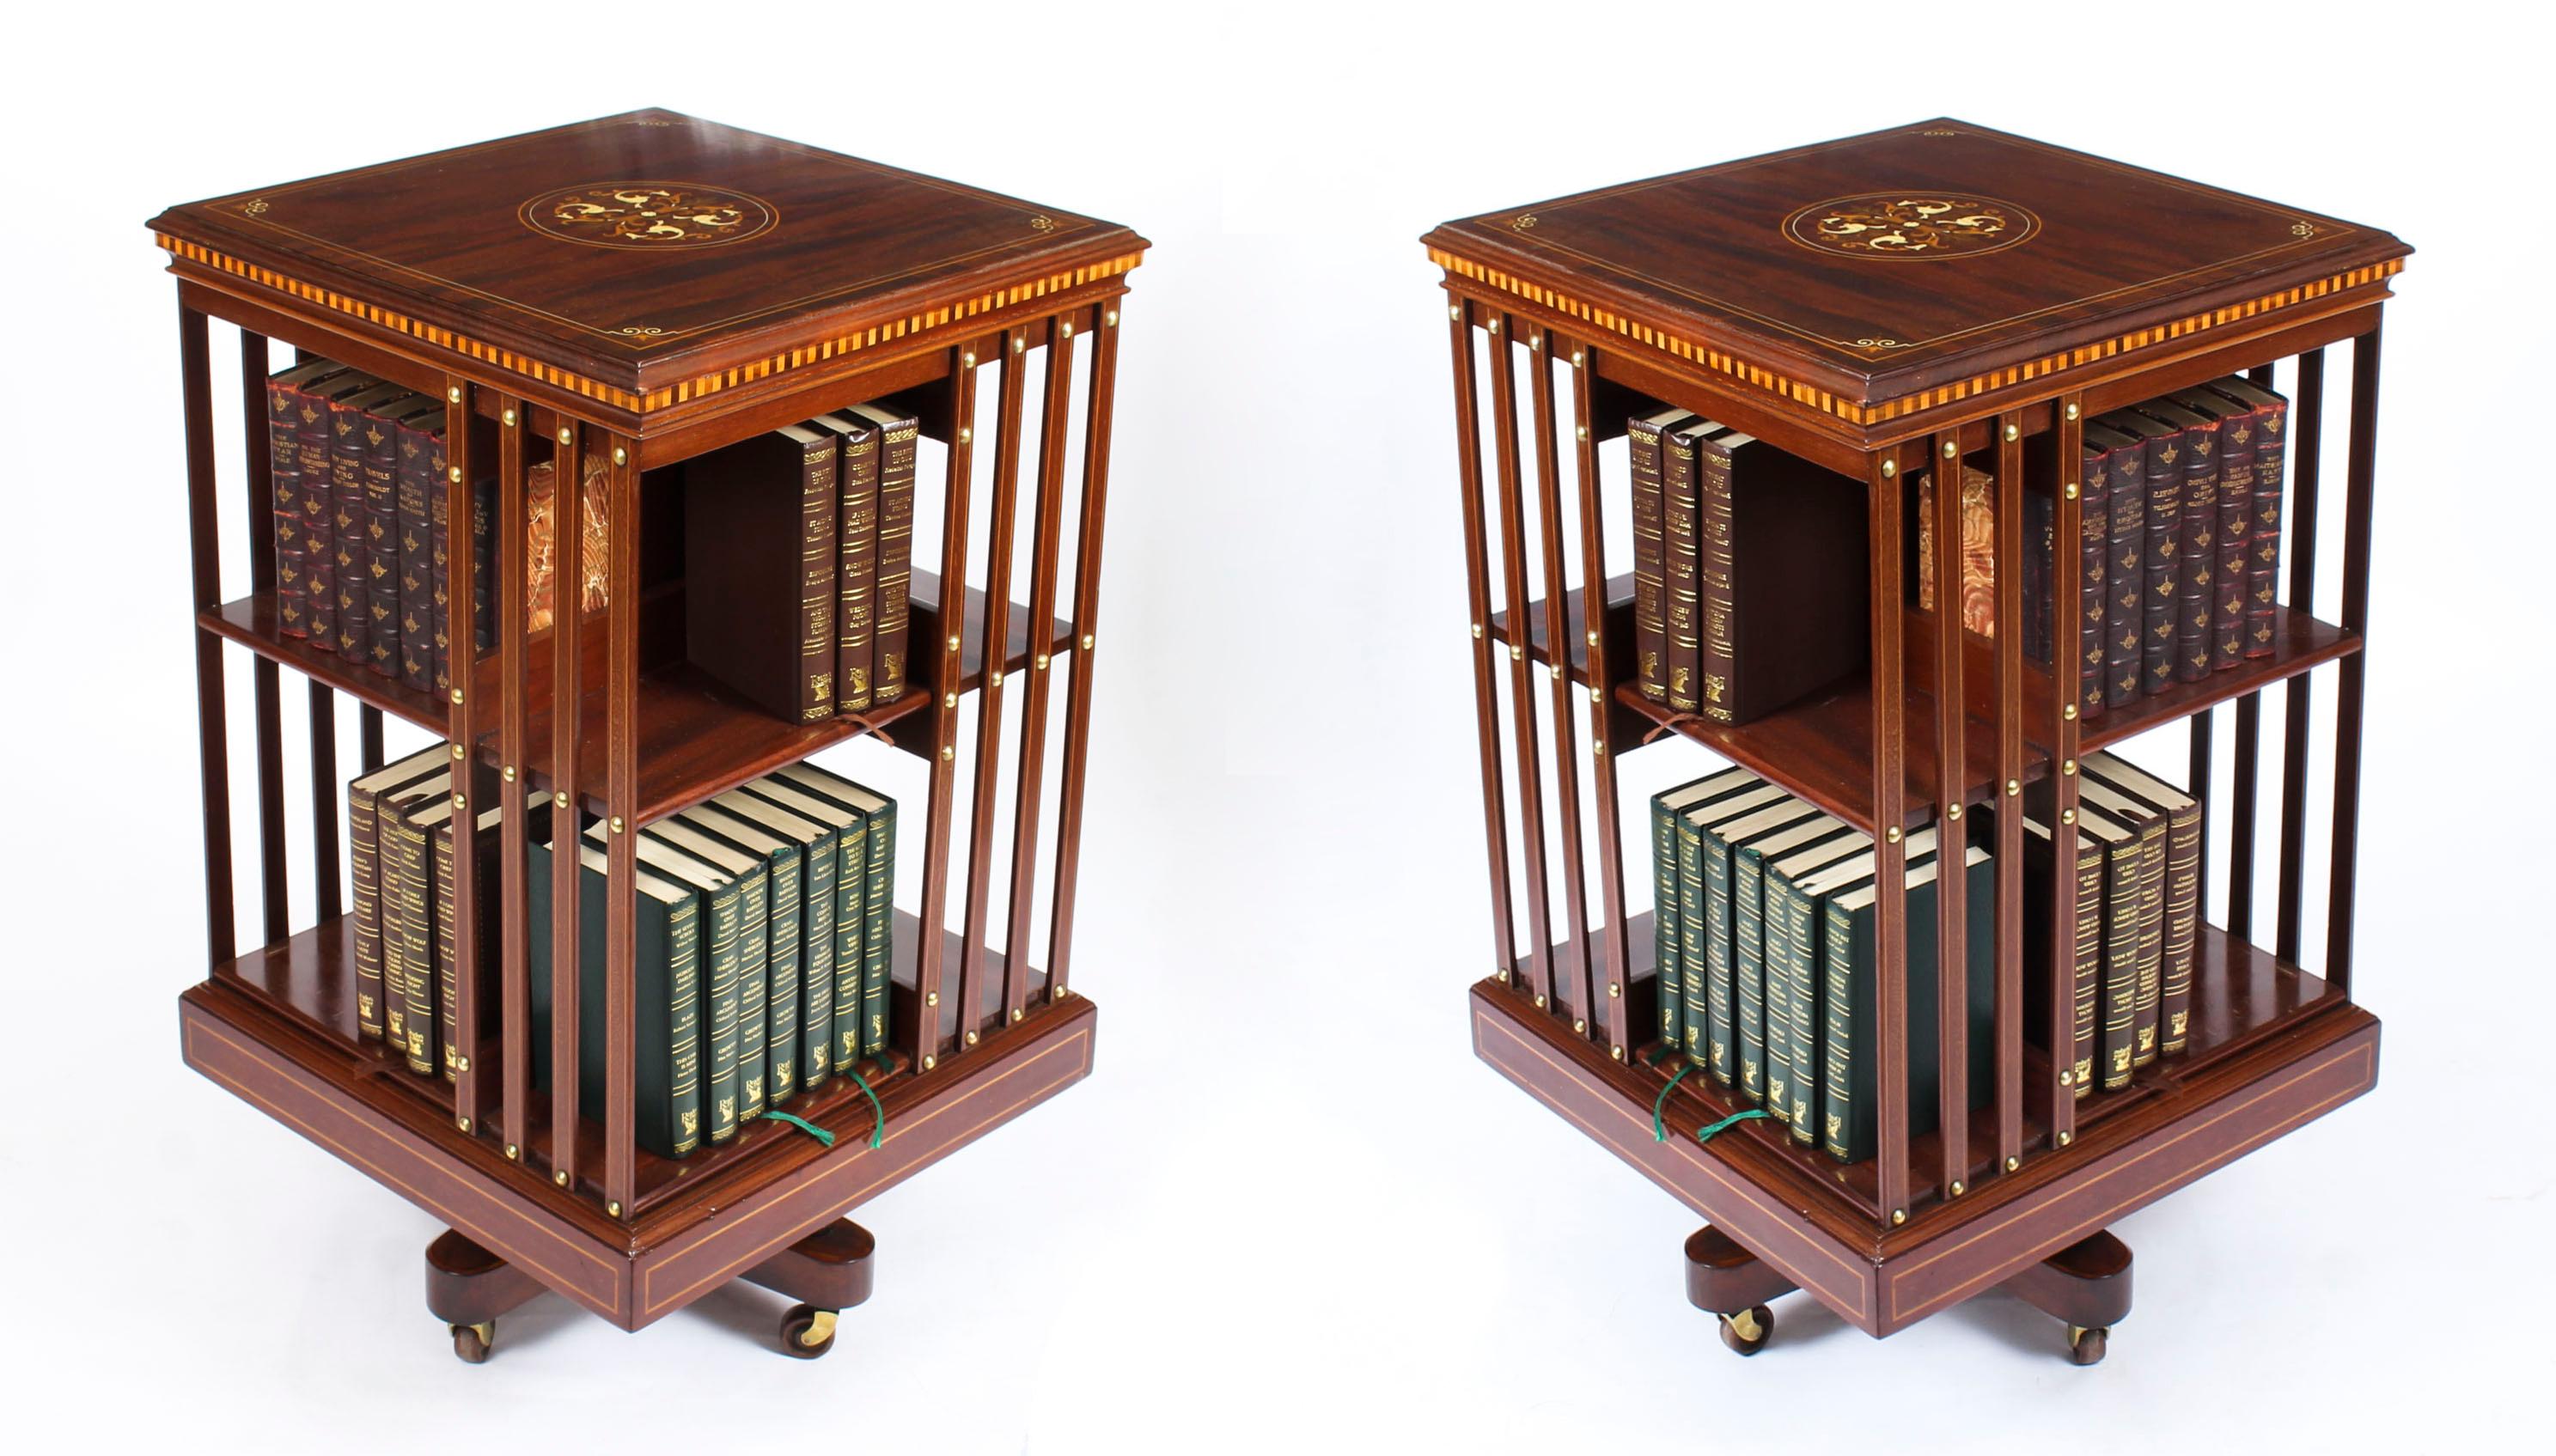 This is an exquisite pair of antique Edwardian marquetry inlaid flame mahogany revolving bookcases, circa 1890 in date.

These exquisite revolving bookcases are made of beautiful solid mahogany and the square tops have been masterfully inlaid with